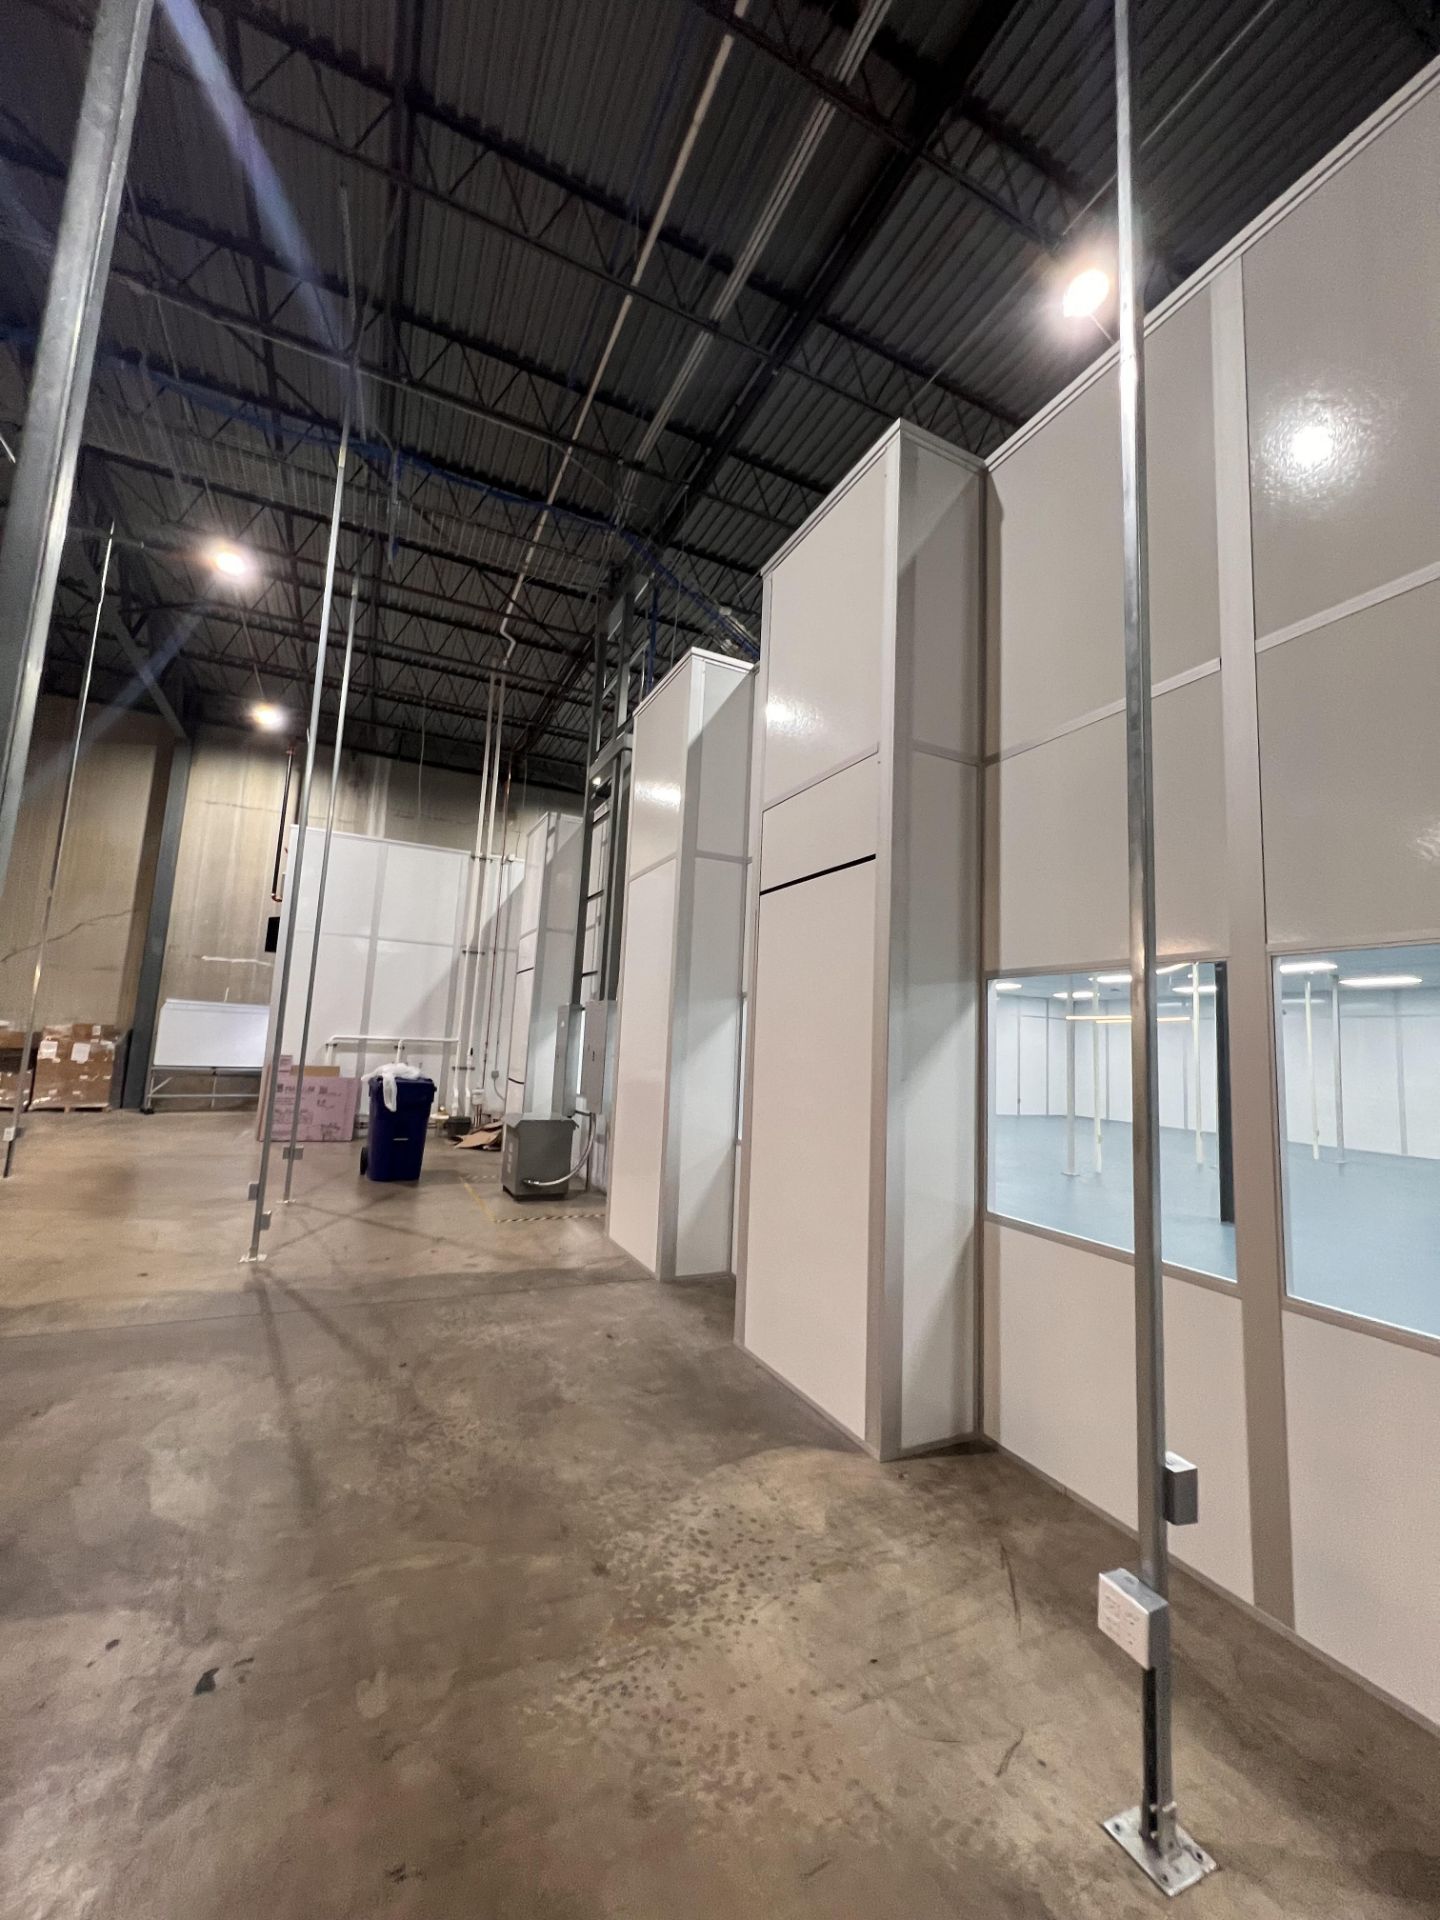 MODULAR CLEAN ROOM, APPROX. 60 FT X 60 FT X 11 FT 10 IN, INCLUDES HEPA FILTRATION UNITS - Image 11 of 34